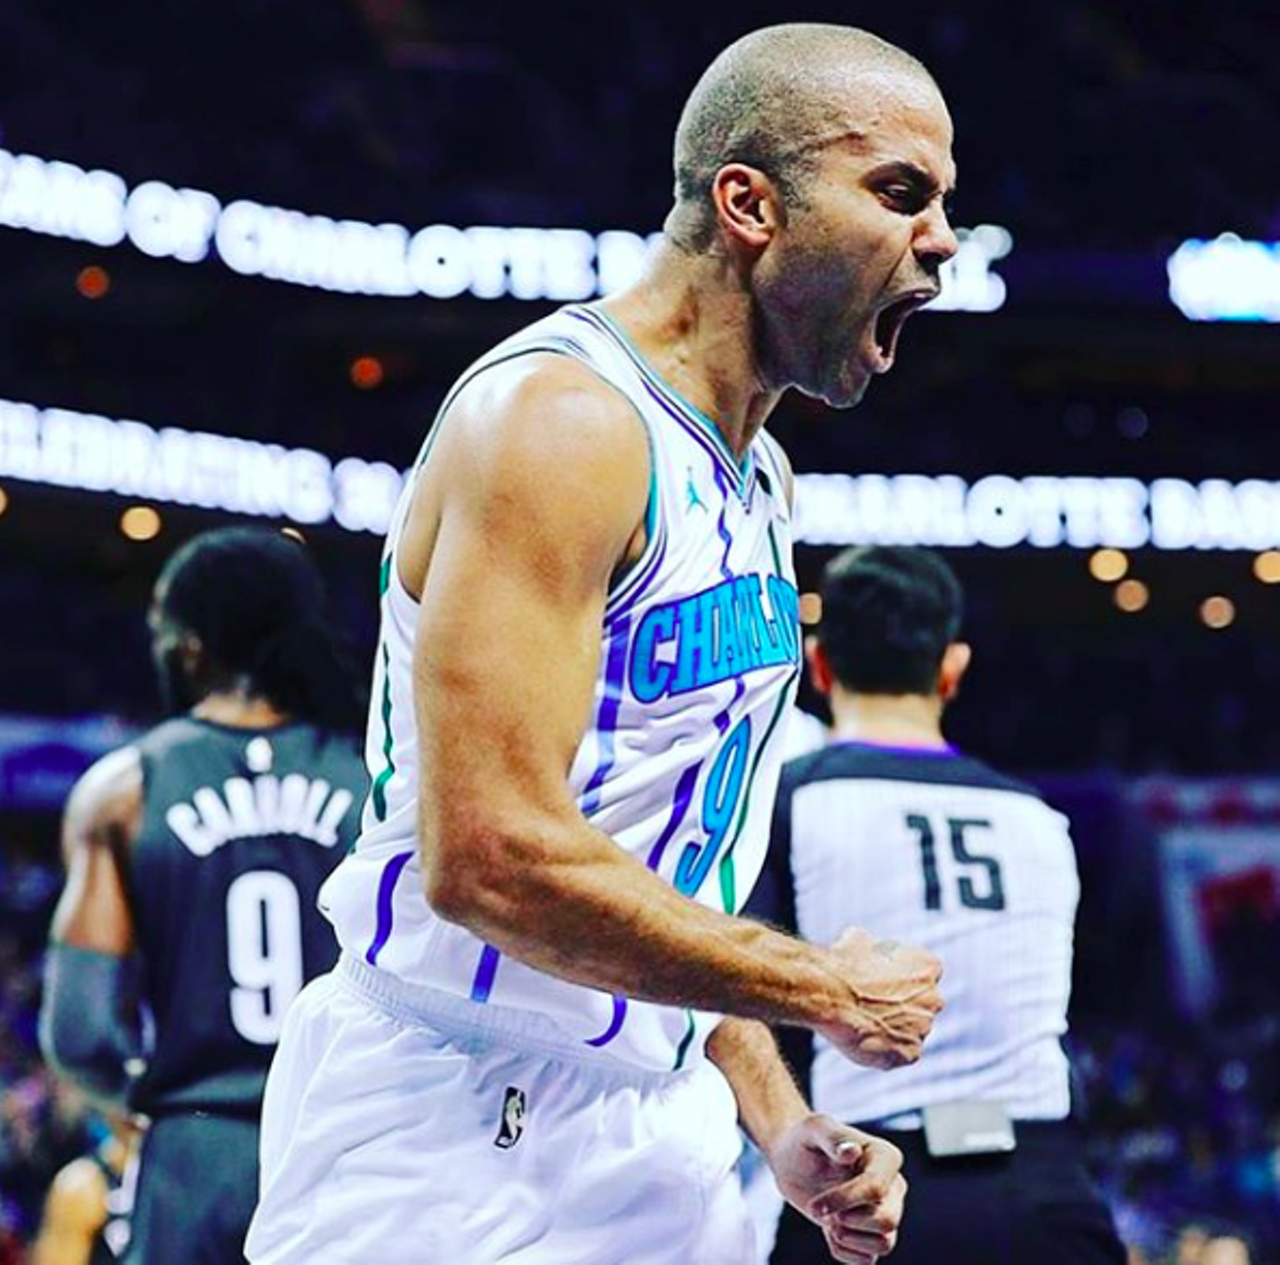 He retired when he was good and ready.
Although it meant he left the Spurs, Tony was traded to the Charlotte Hornets in 2018 because he wanted to have a relevant place on the team, and the Spurs just weren’t doing that anymore. Lots of basketball heads can respect that. But just a year later, his heart wasn’t in it anymore. After his retirement announcement, Parker said he could physically play another two seasons, but just didn’t feel like it. That takes a lot of guts to admit.
Photo via Instagram / _tonyparker09